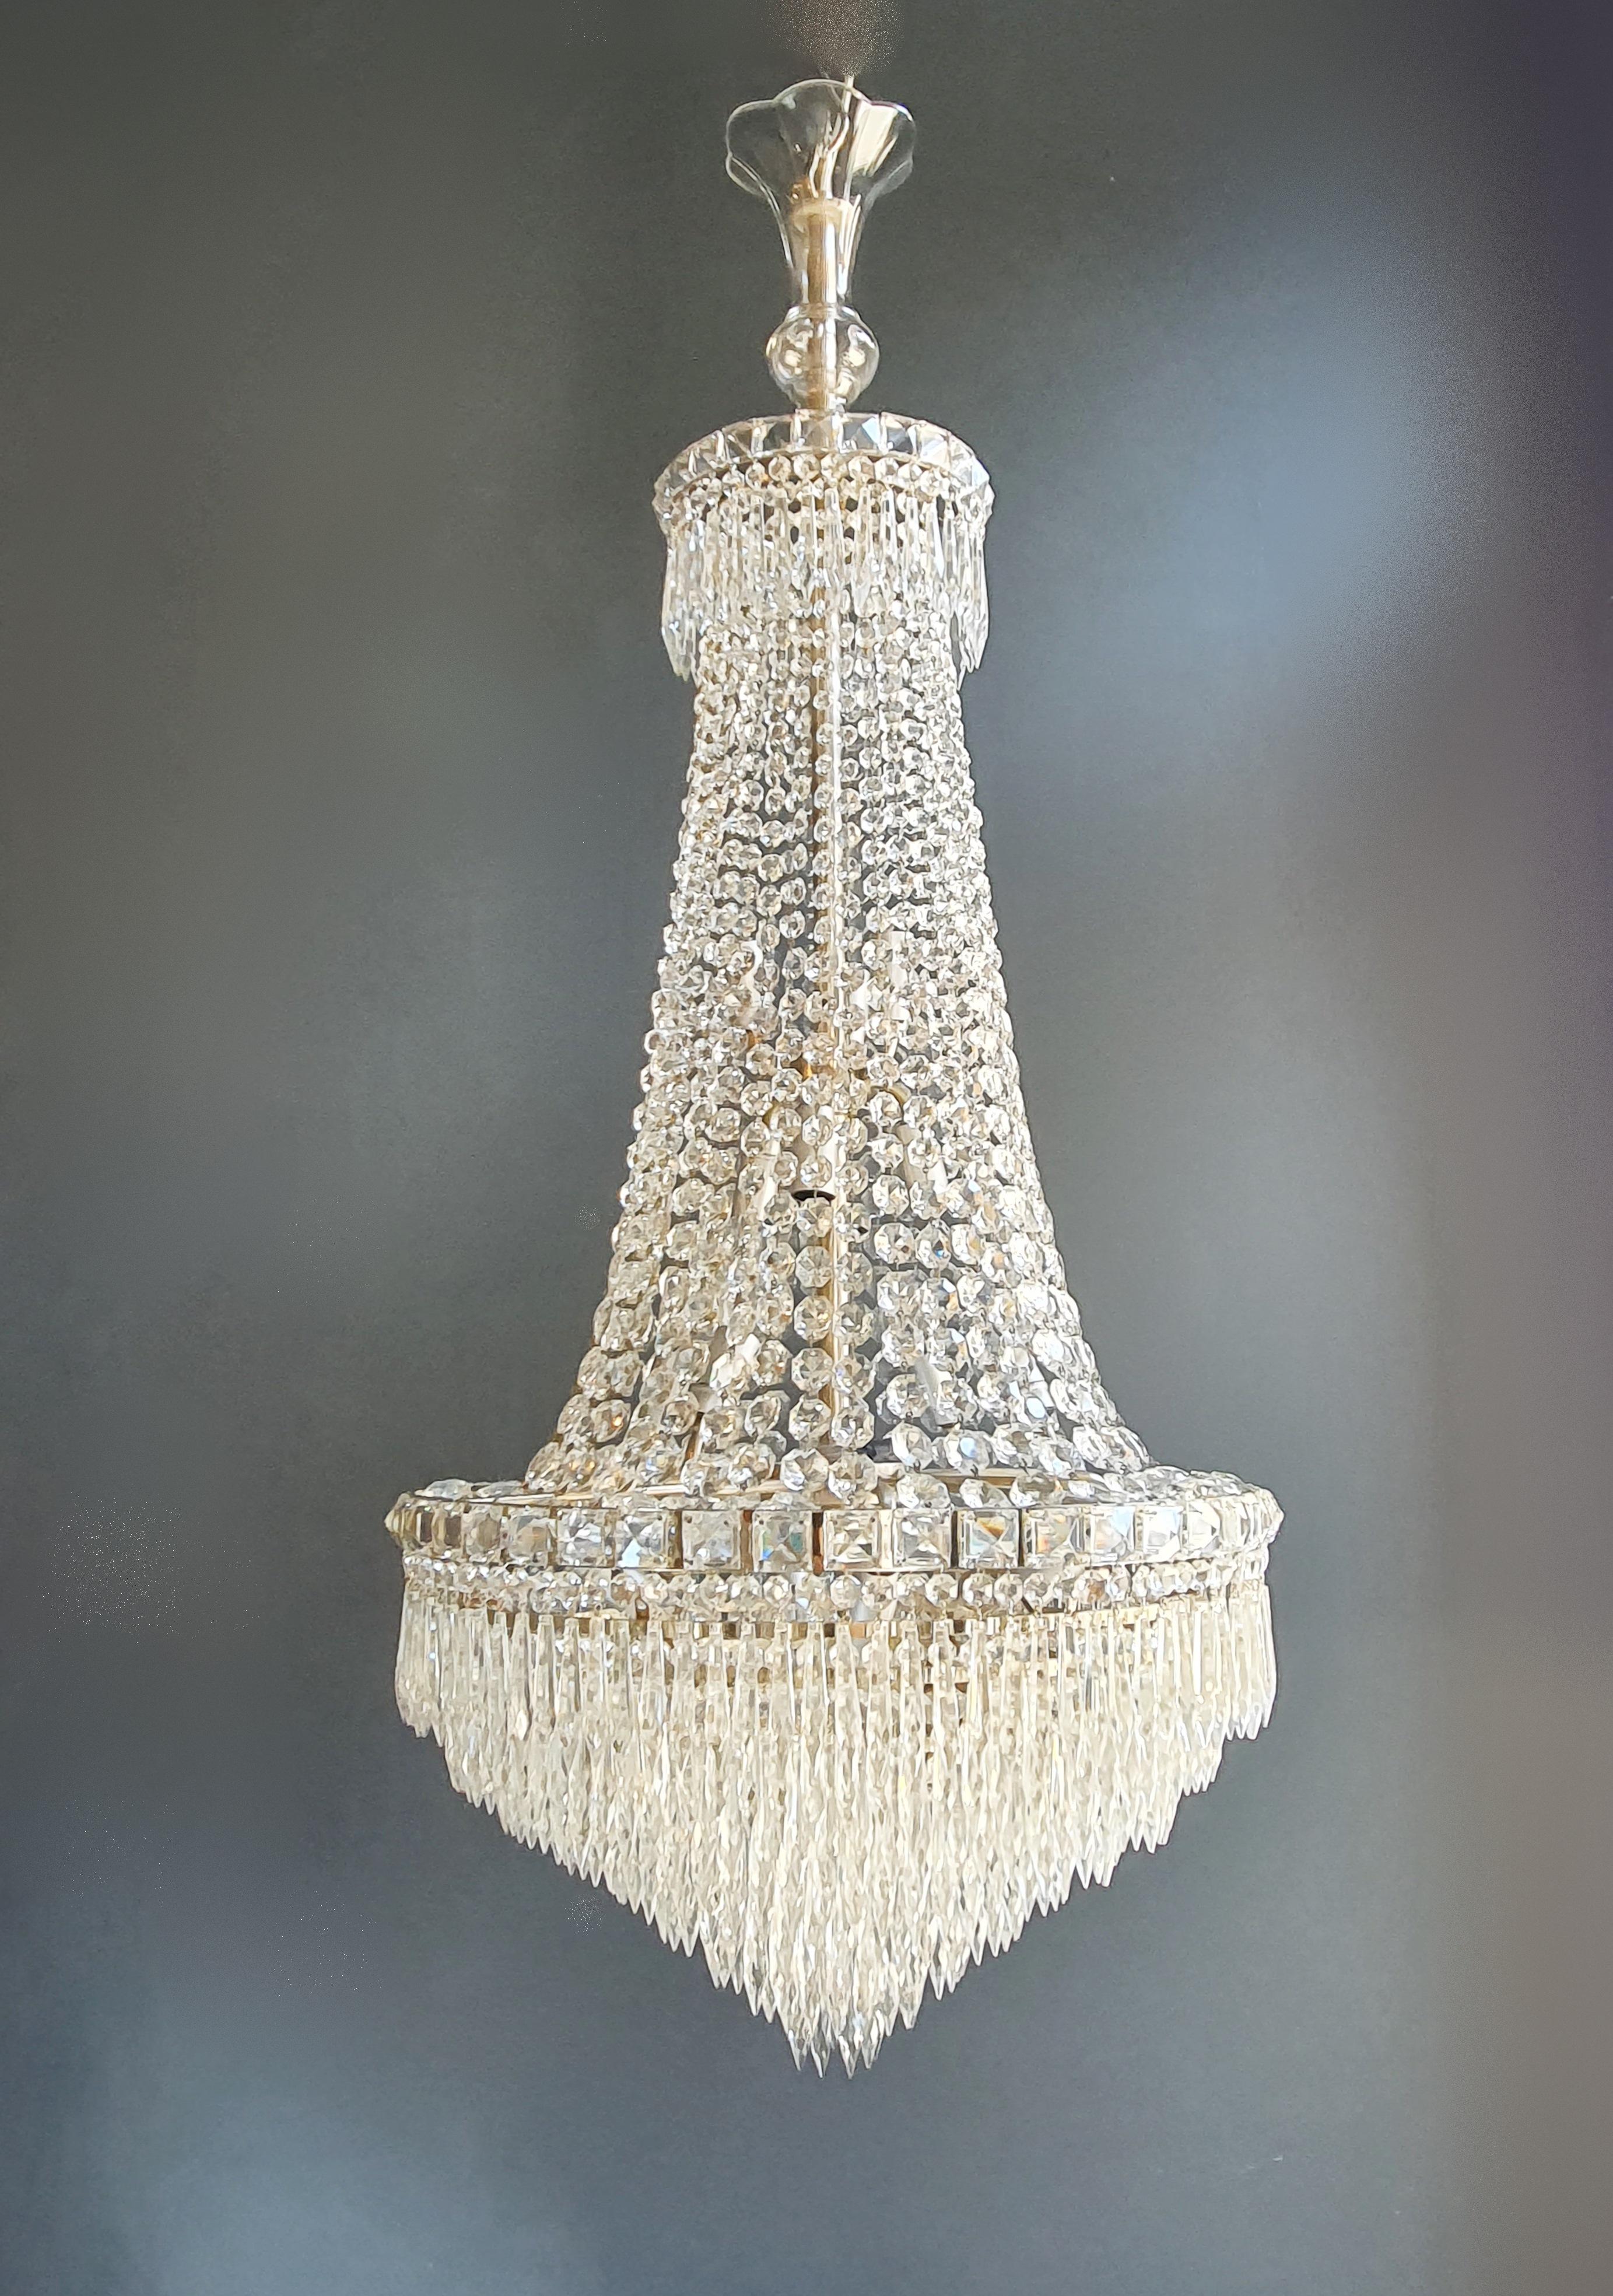 Mid-20th Century Fine Empire Waterfall Chandelier Crystal Sac a Pearl Lamp Lustre Silver Art Deco